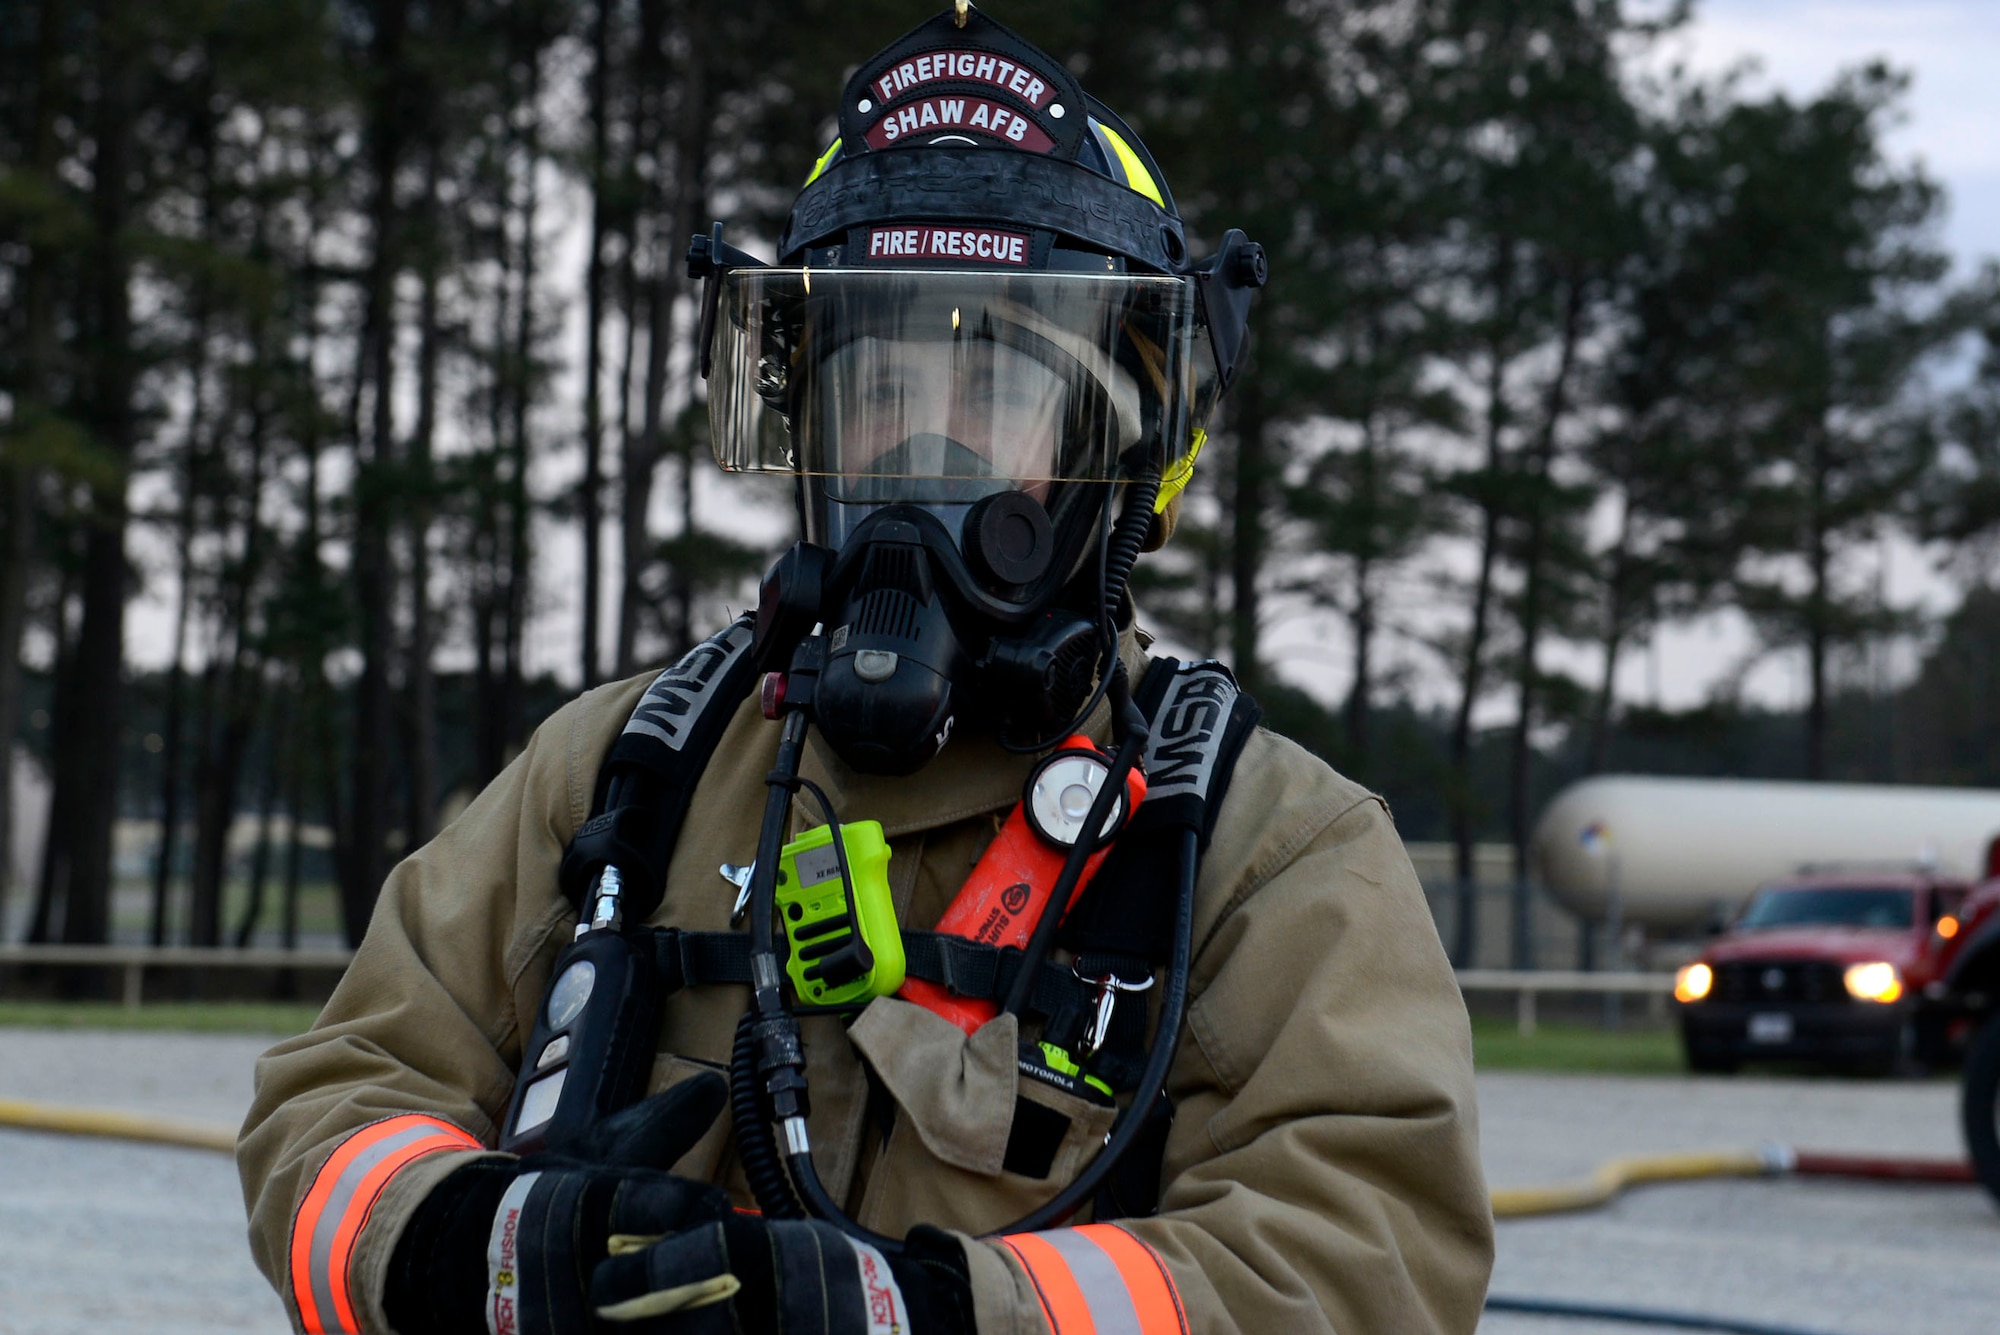 U.S. Air Force Senior Airman Nathan Webber, 20th Civil Engineer Squadron firefighter, waits for the conclusion of aircraft fire training at Shaw Air Force Base, S.C., March 17, 2016. Webber and other firefighters from the 20th CES fire department communicated and worked together to extinguish a fire on a mock C-130. (U.S. Air Force photo by Airman 1st Class Christopher Maldonado)